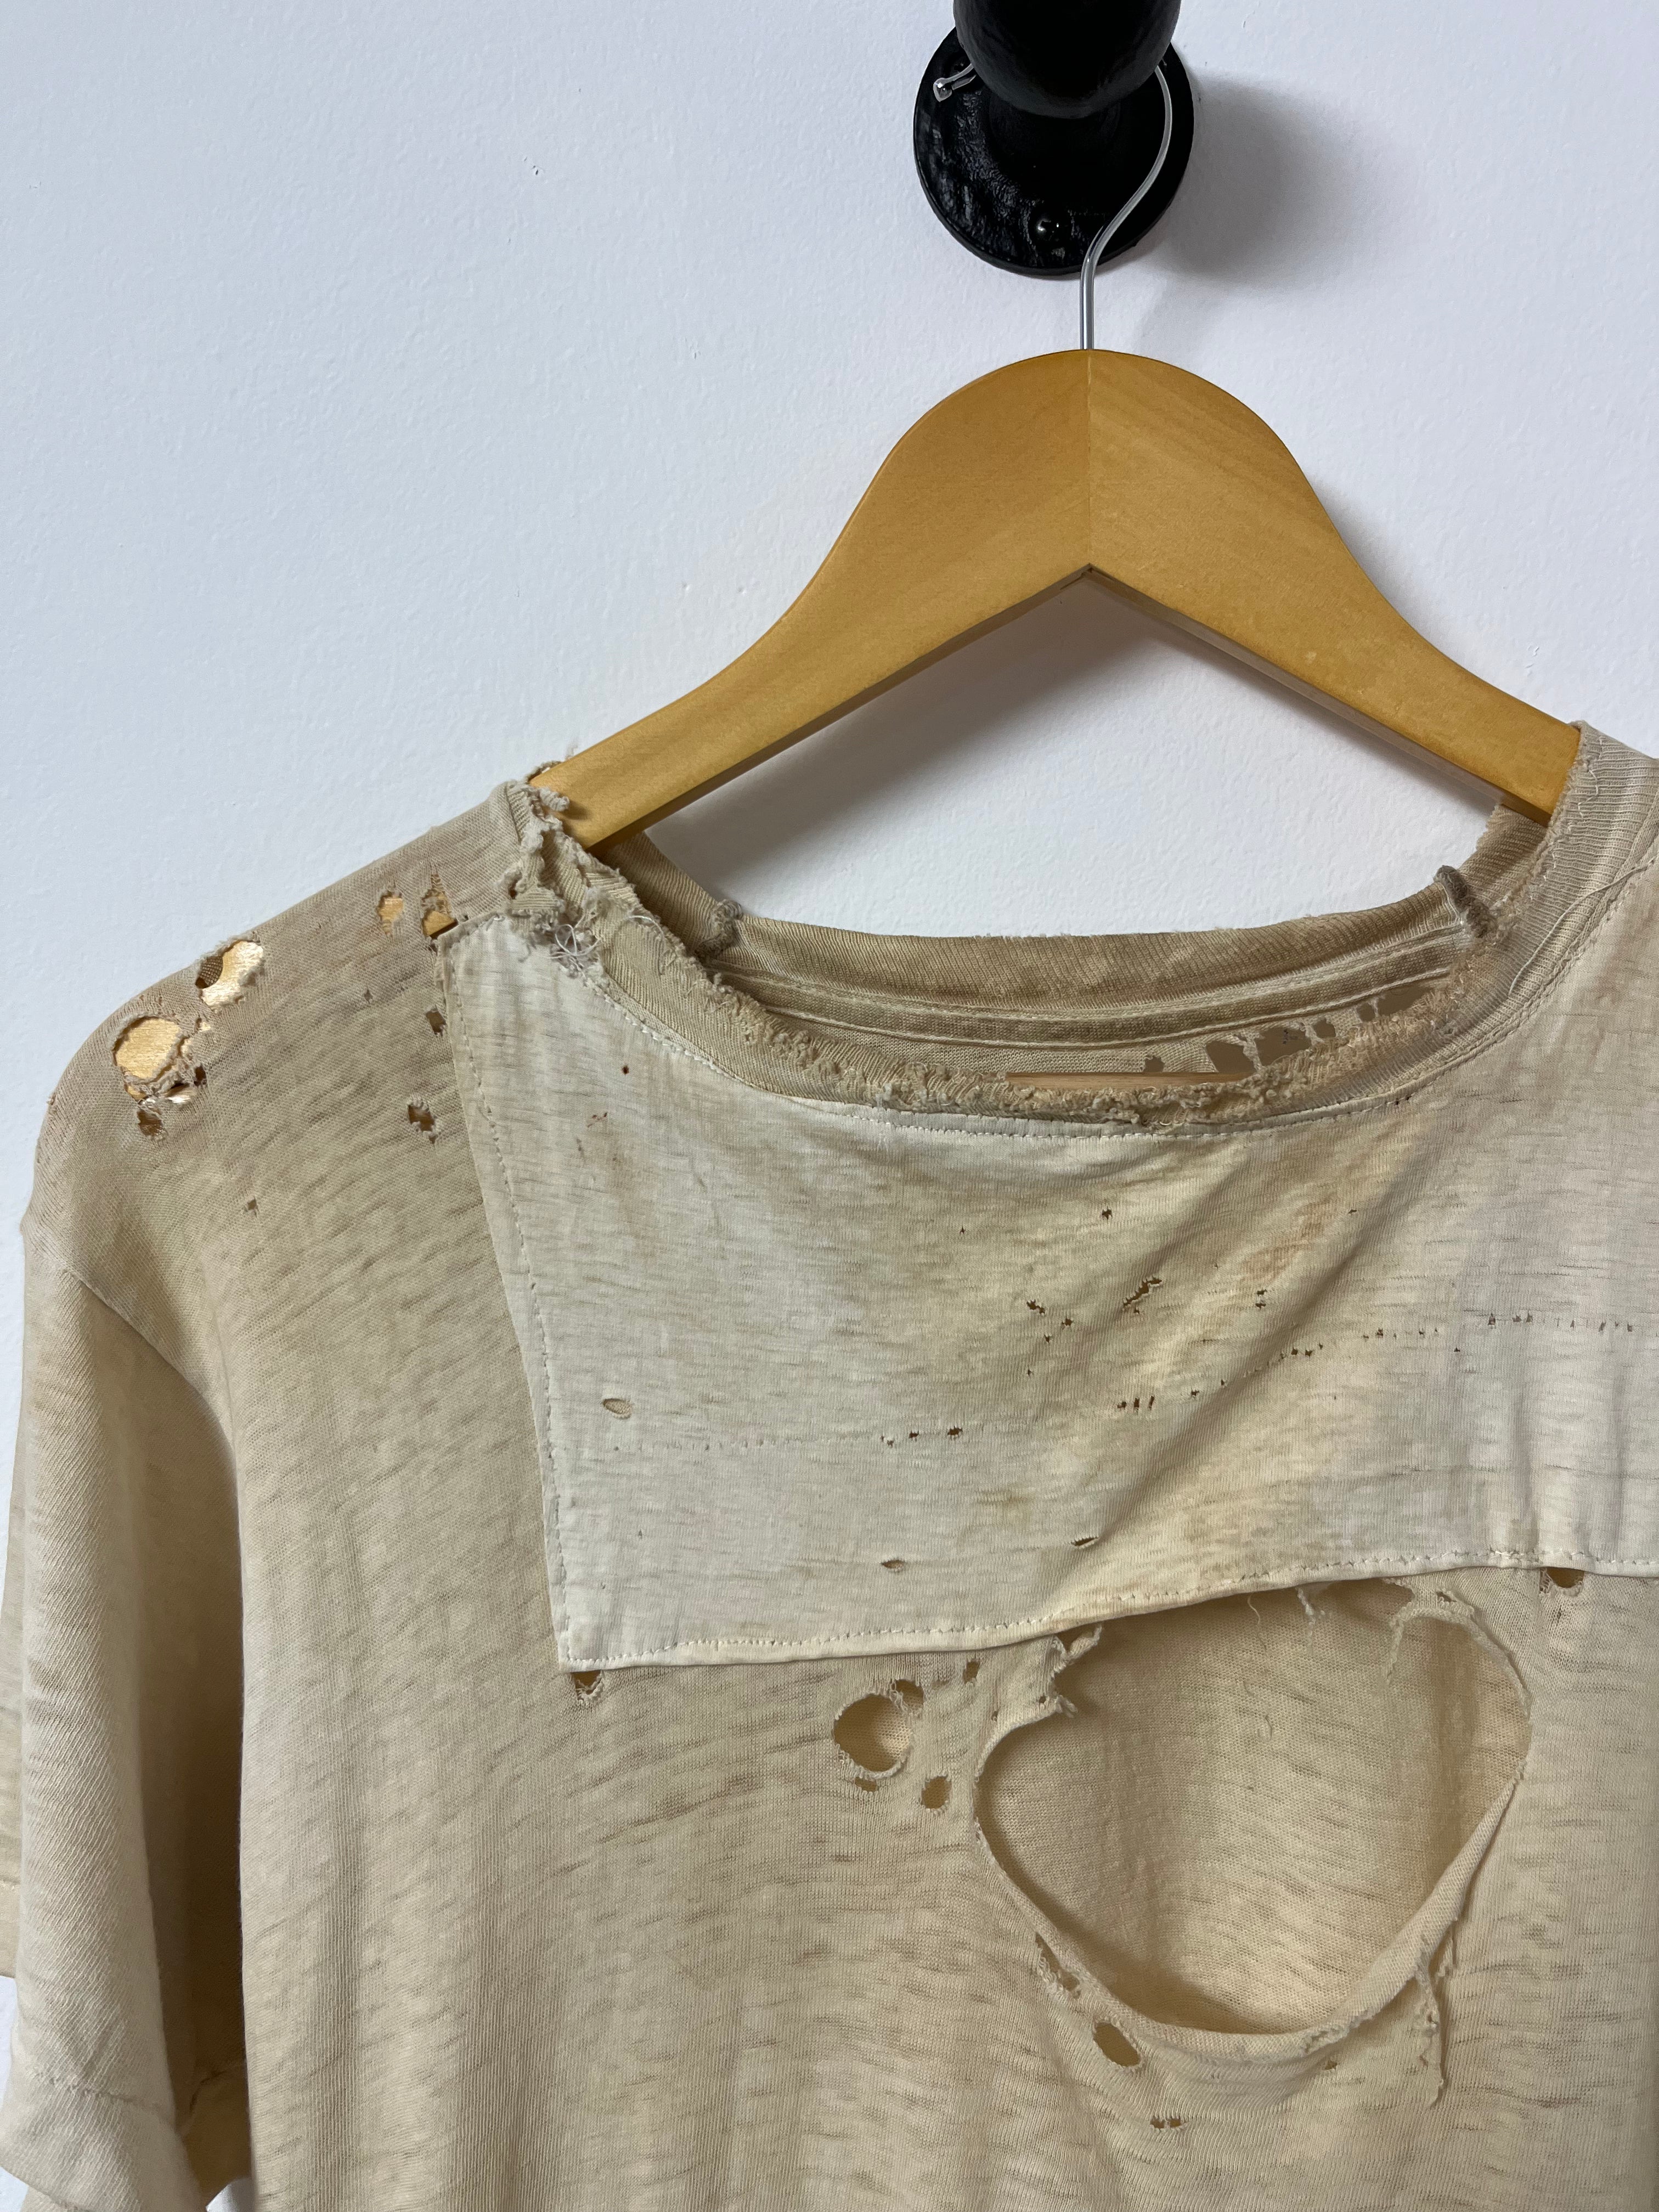 1960s/70s Thrashed and Repaired Farm-Worn T-Shirt - Dirty/Aged White - L/XL